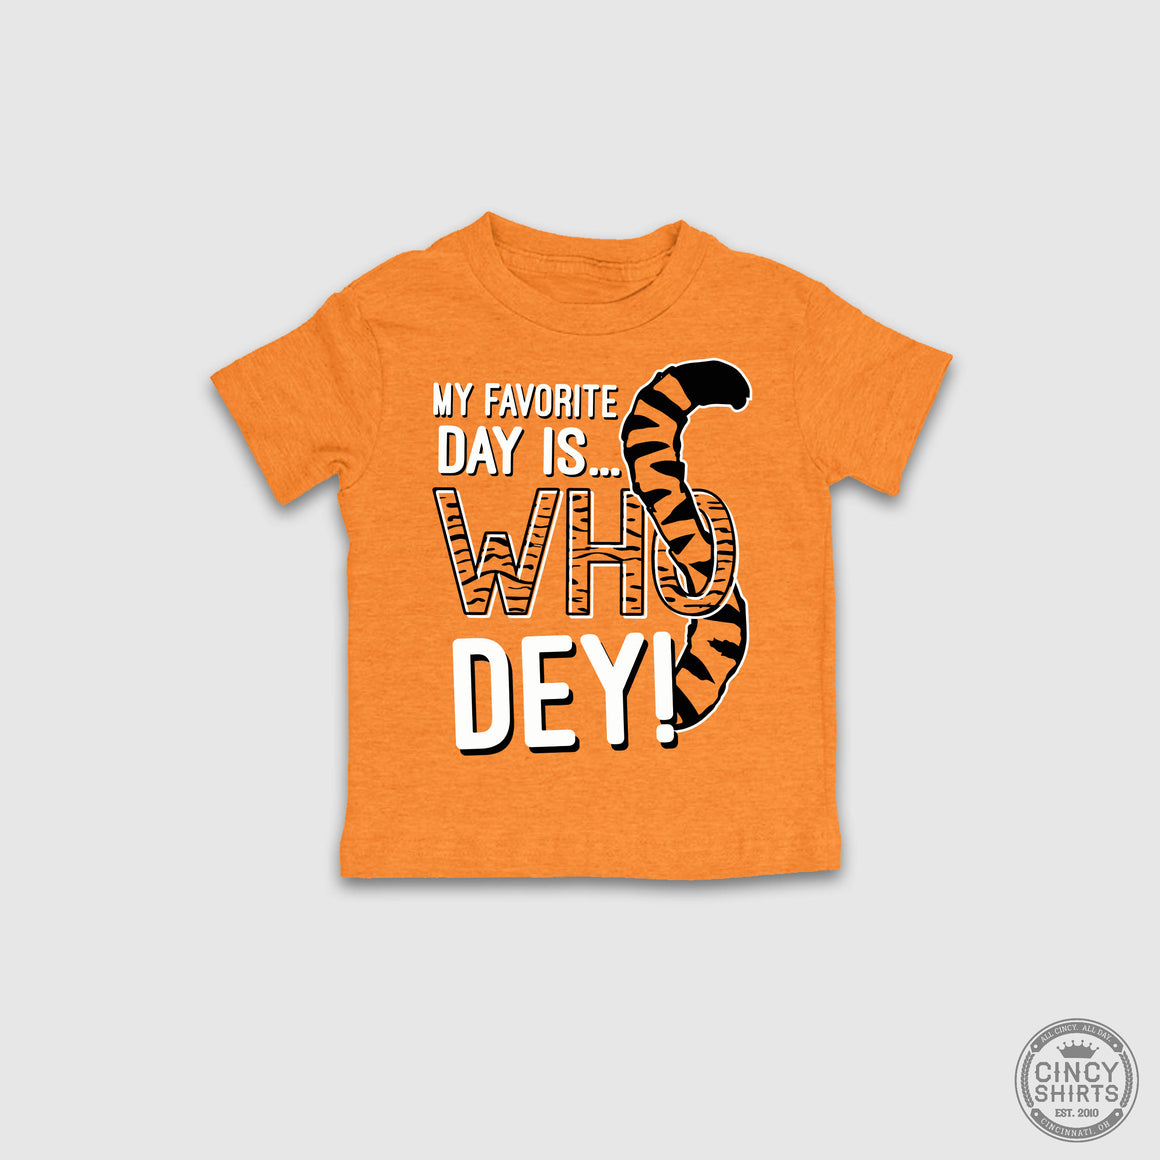 My Favorite Day Is Who Dey - Youth Sizes - Cincy Shirts